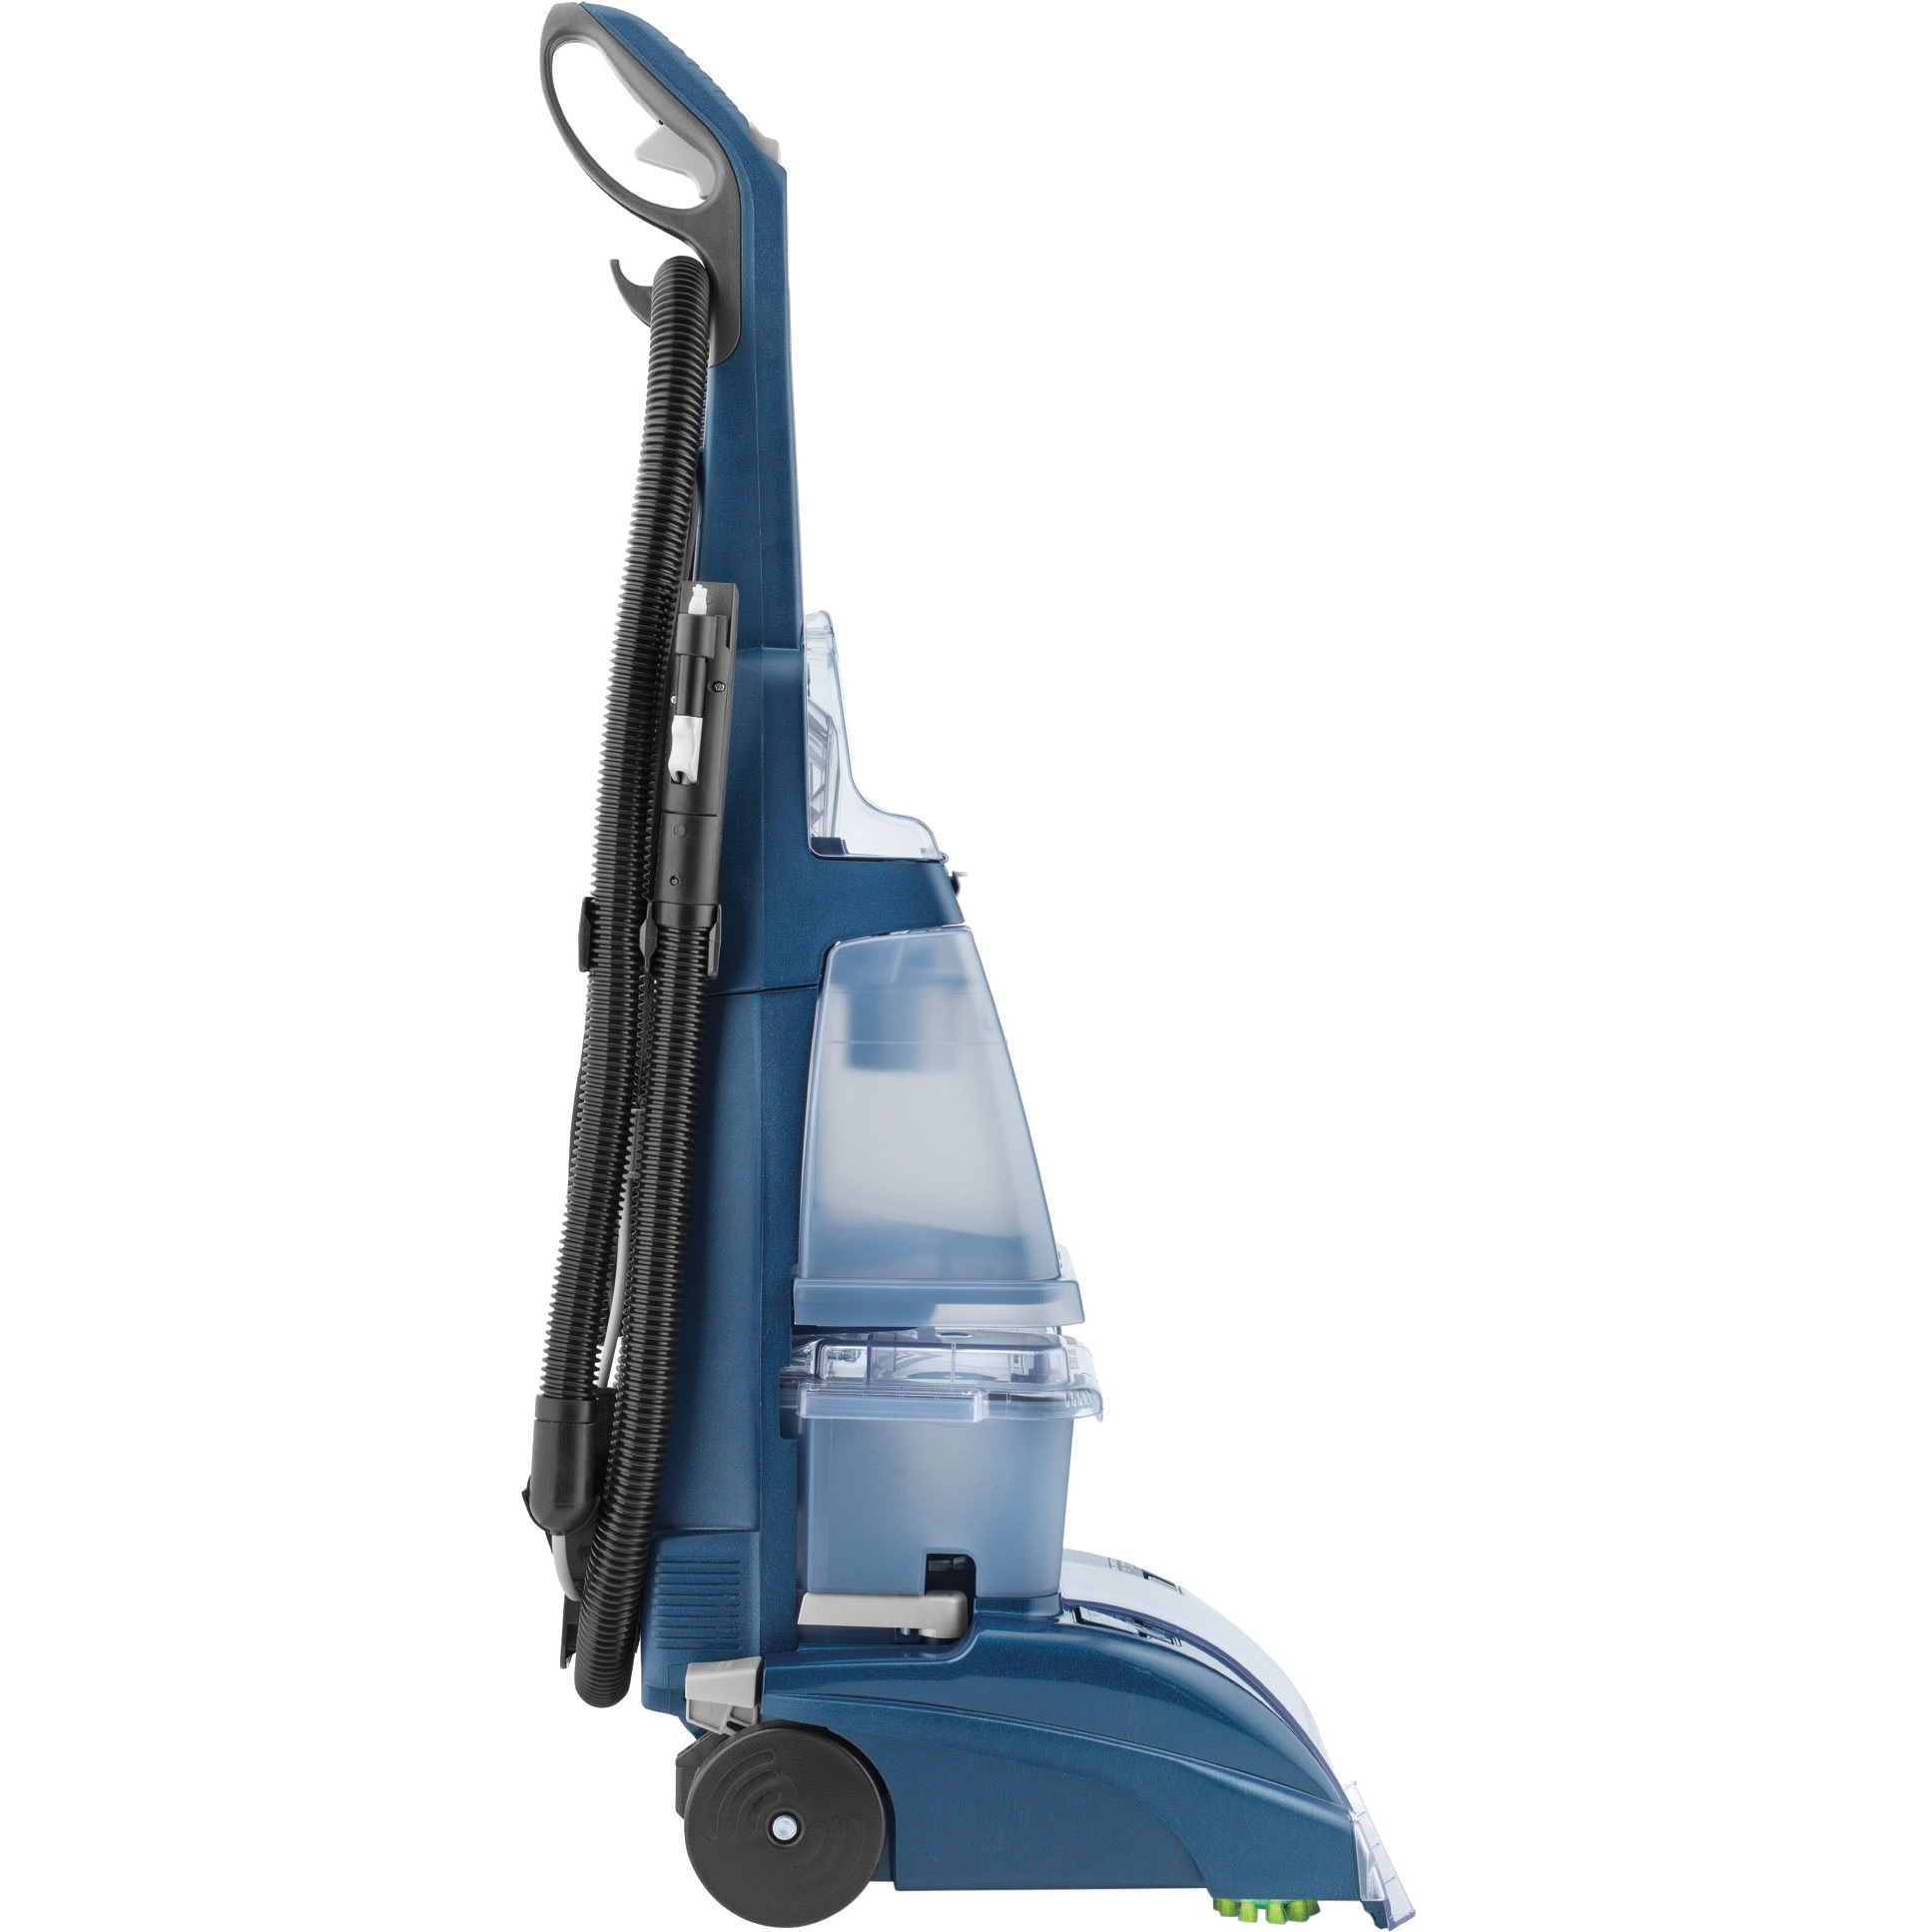 Hoover SteamVac SpinScrub with CleanSurge Carpet Cleaner, F5915905 - image 3 of 5